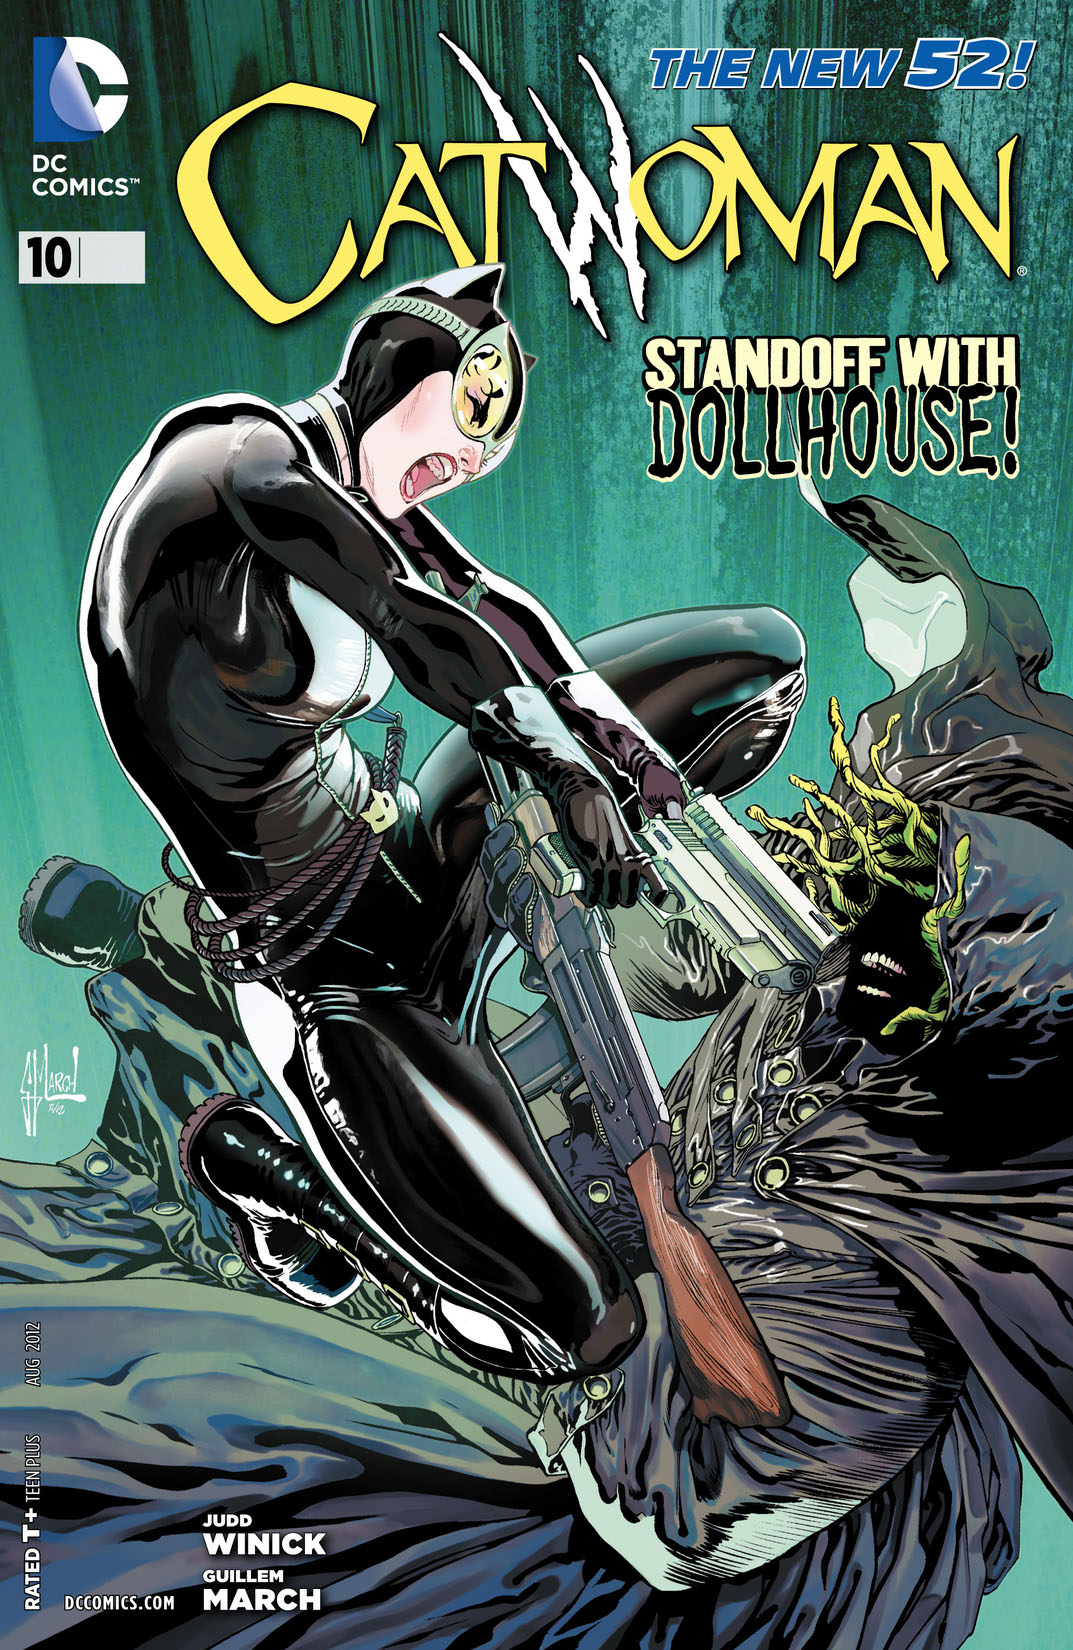 Catwoman (2011-) #10 preview images